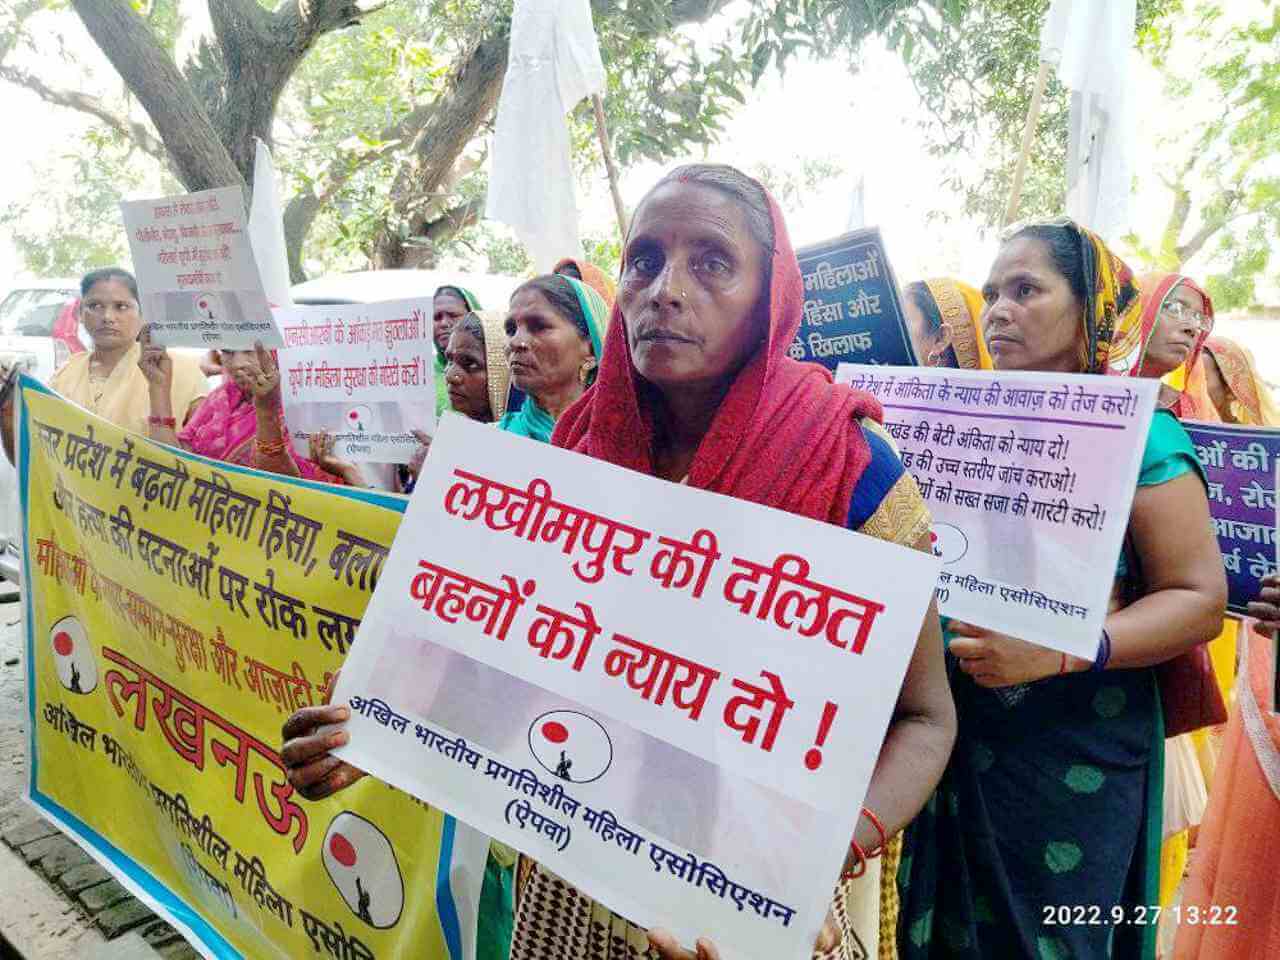 Demonstration against rising incidents of women